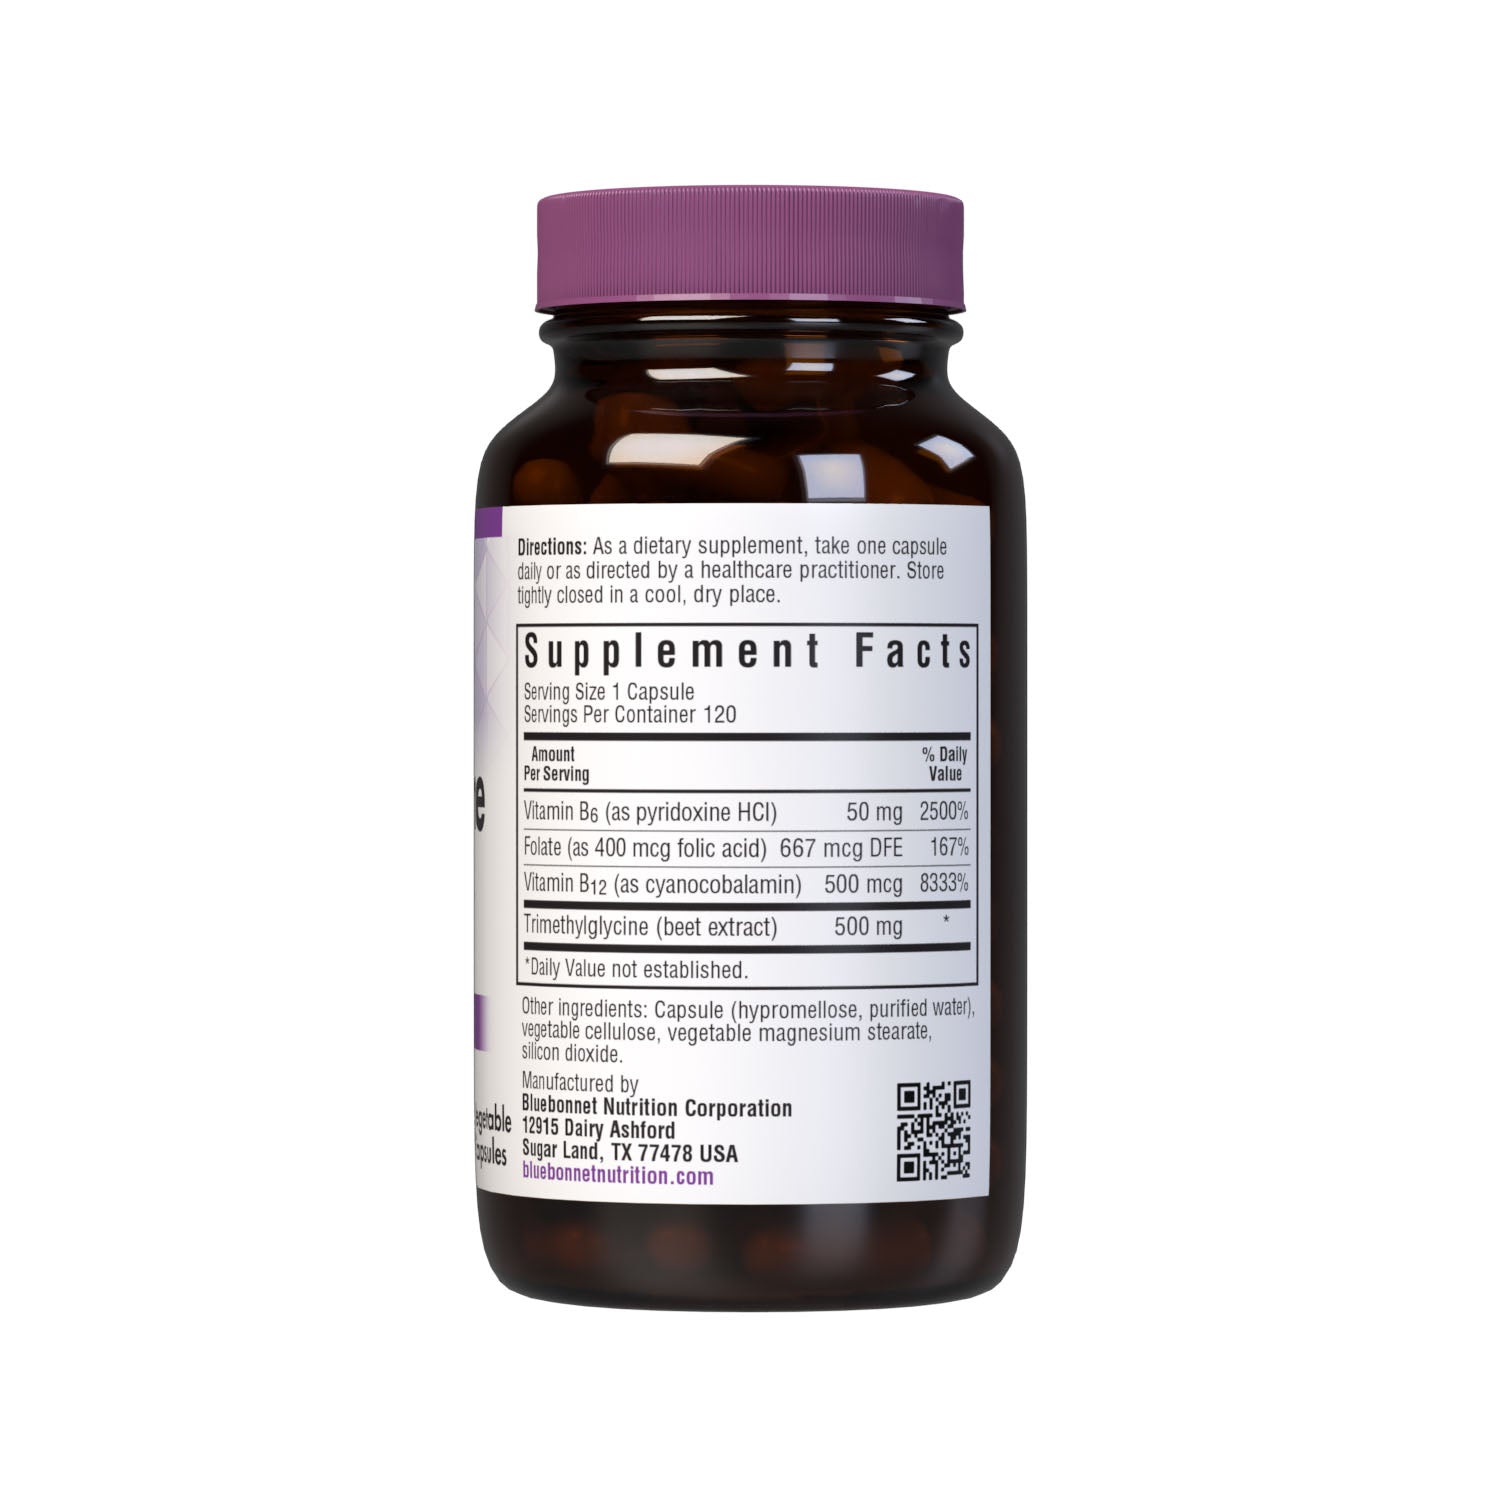 Bluebonnet’s Homocysteine Formula 120 Vegetable Capsules are formulated with vitamin B6, vitamin B12 and folic acid, along with trimethylglycine derived from non-GMO beets to support heart health and homocysteine levels already within the normal range. Supplement facts panel. #size_120 count